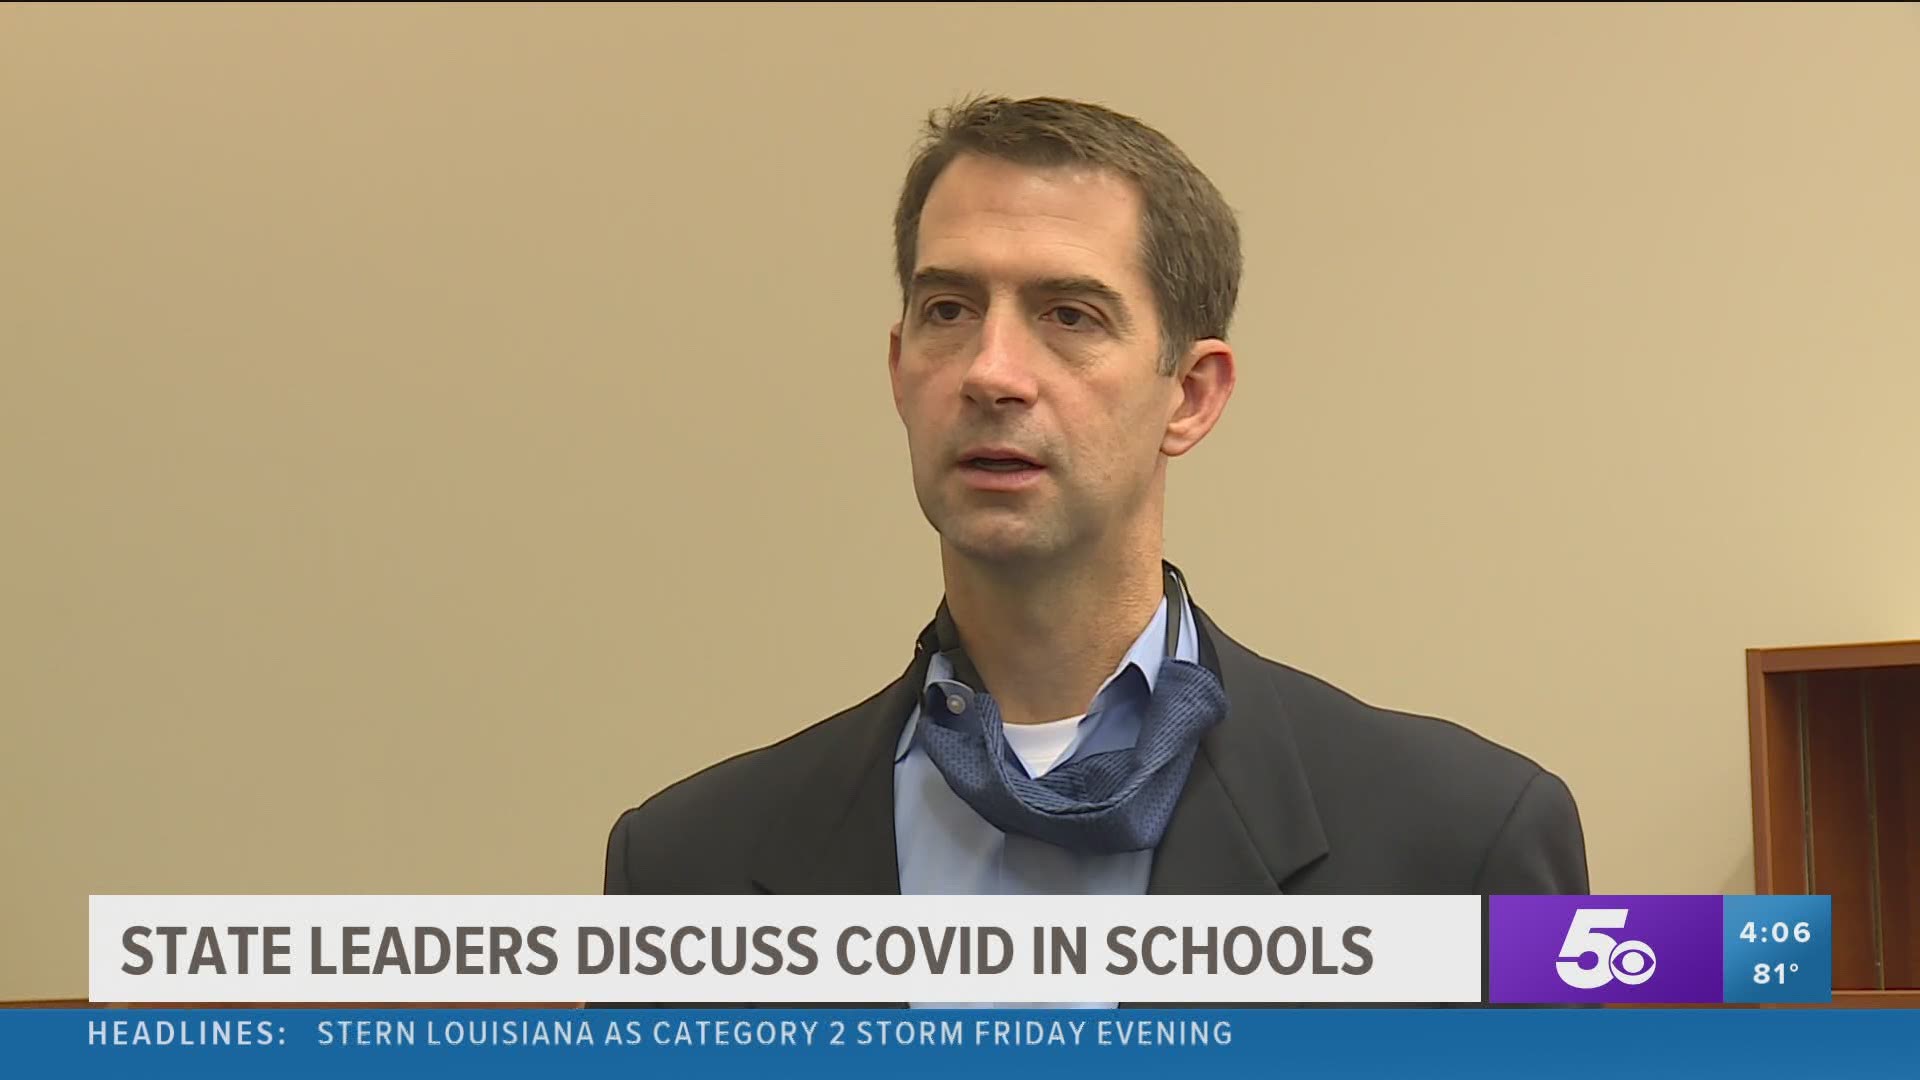 Senator Cotton checked in and see how the school is handing COVID-19 and blended learning. https://bit.ly/2FlUWF2